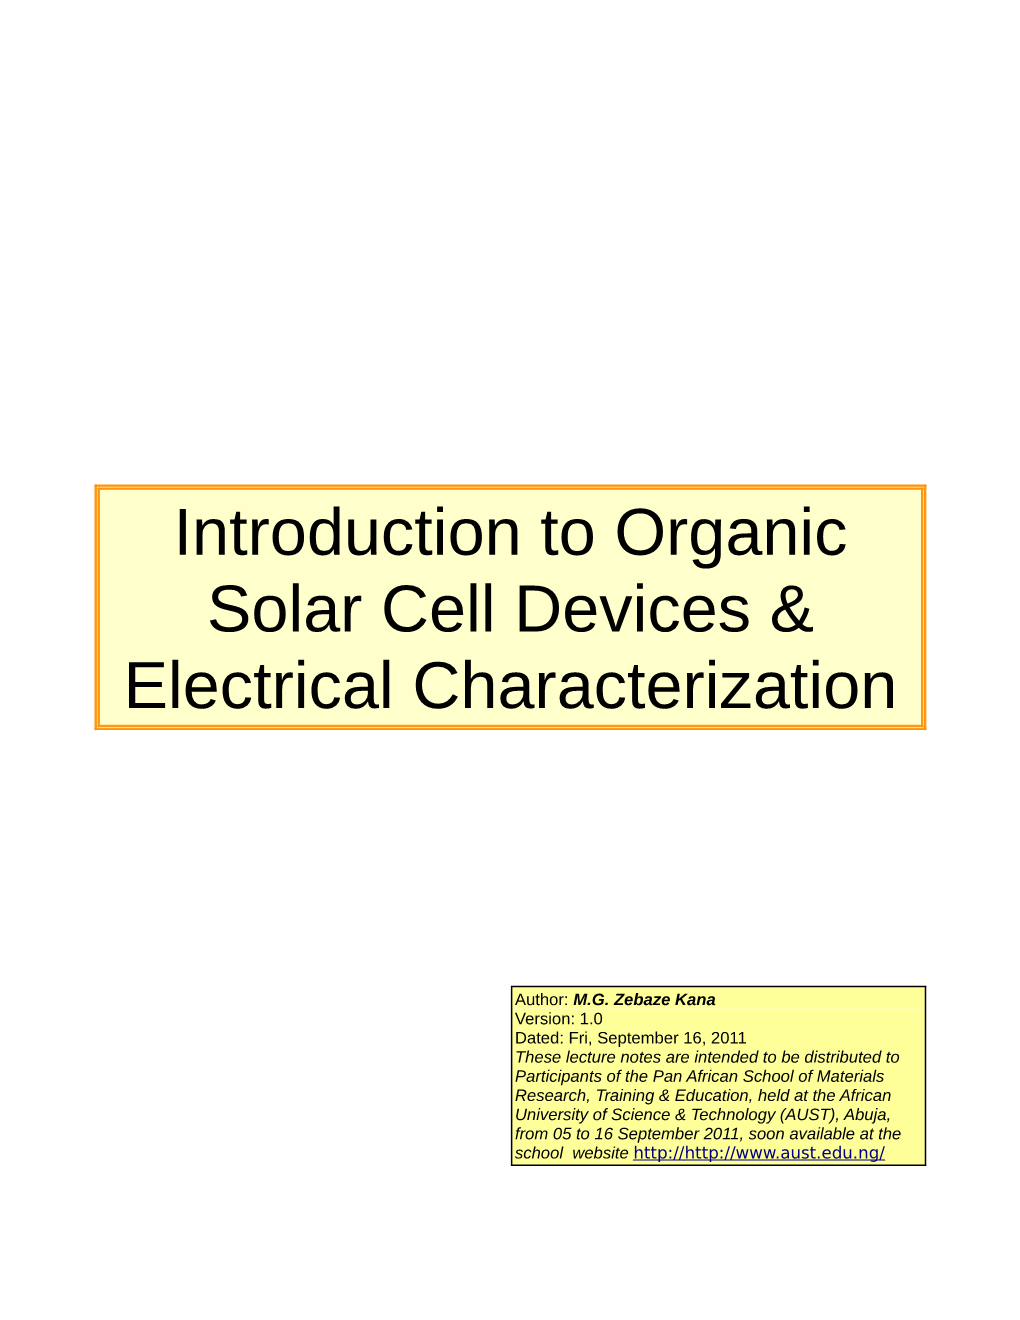 Introduction to Organic Solar Cell Devices & Electrical Characterization